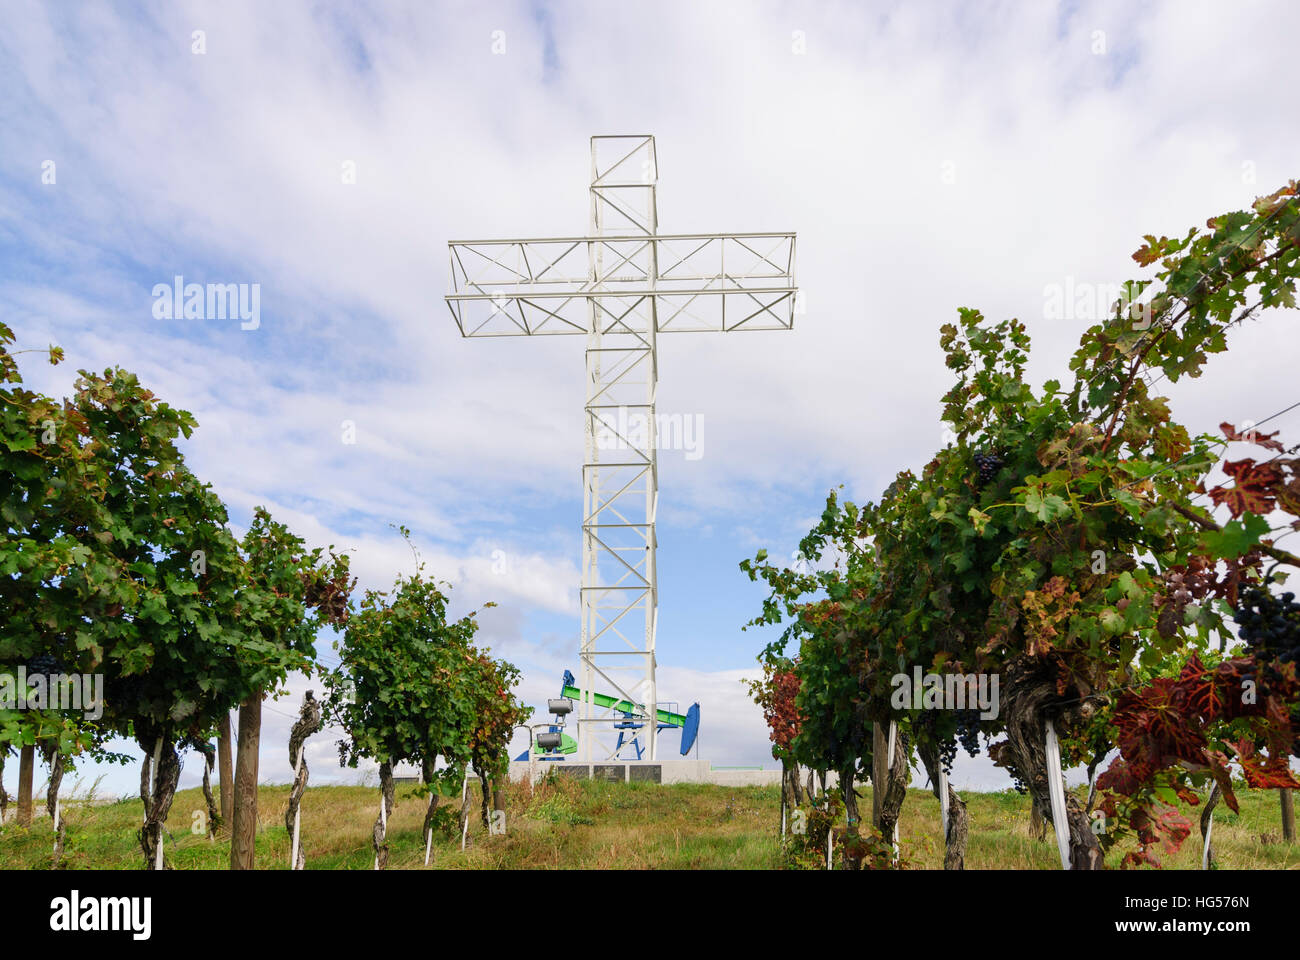 Prottes: Petroleum pump in the Matzen field of the OMV and Babara Cross to commemorate workers of the OMV in the midst of vineyards who had been kille Stock Photo